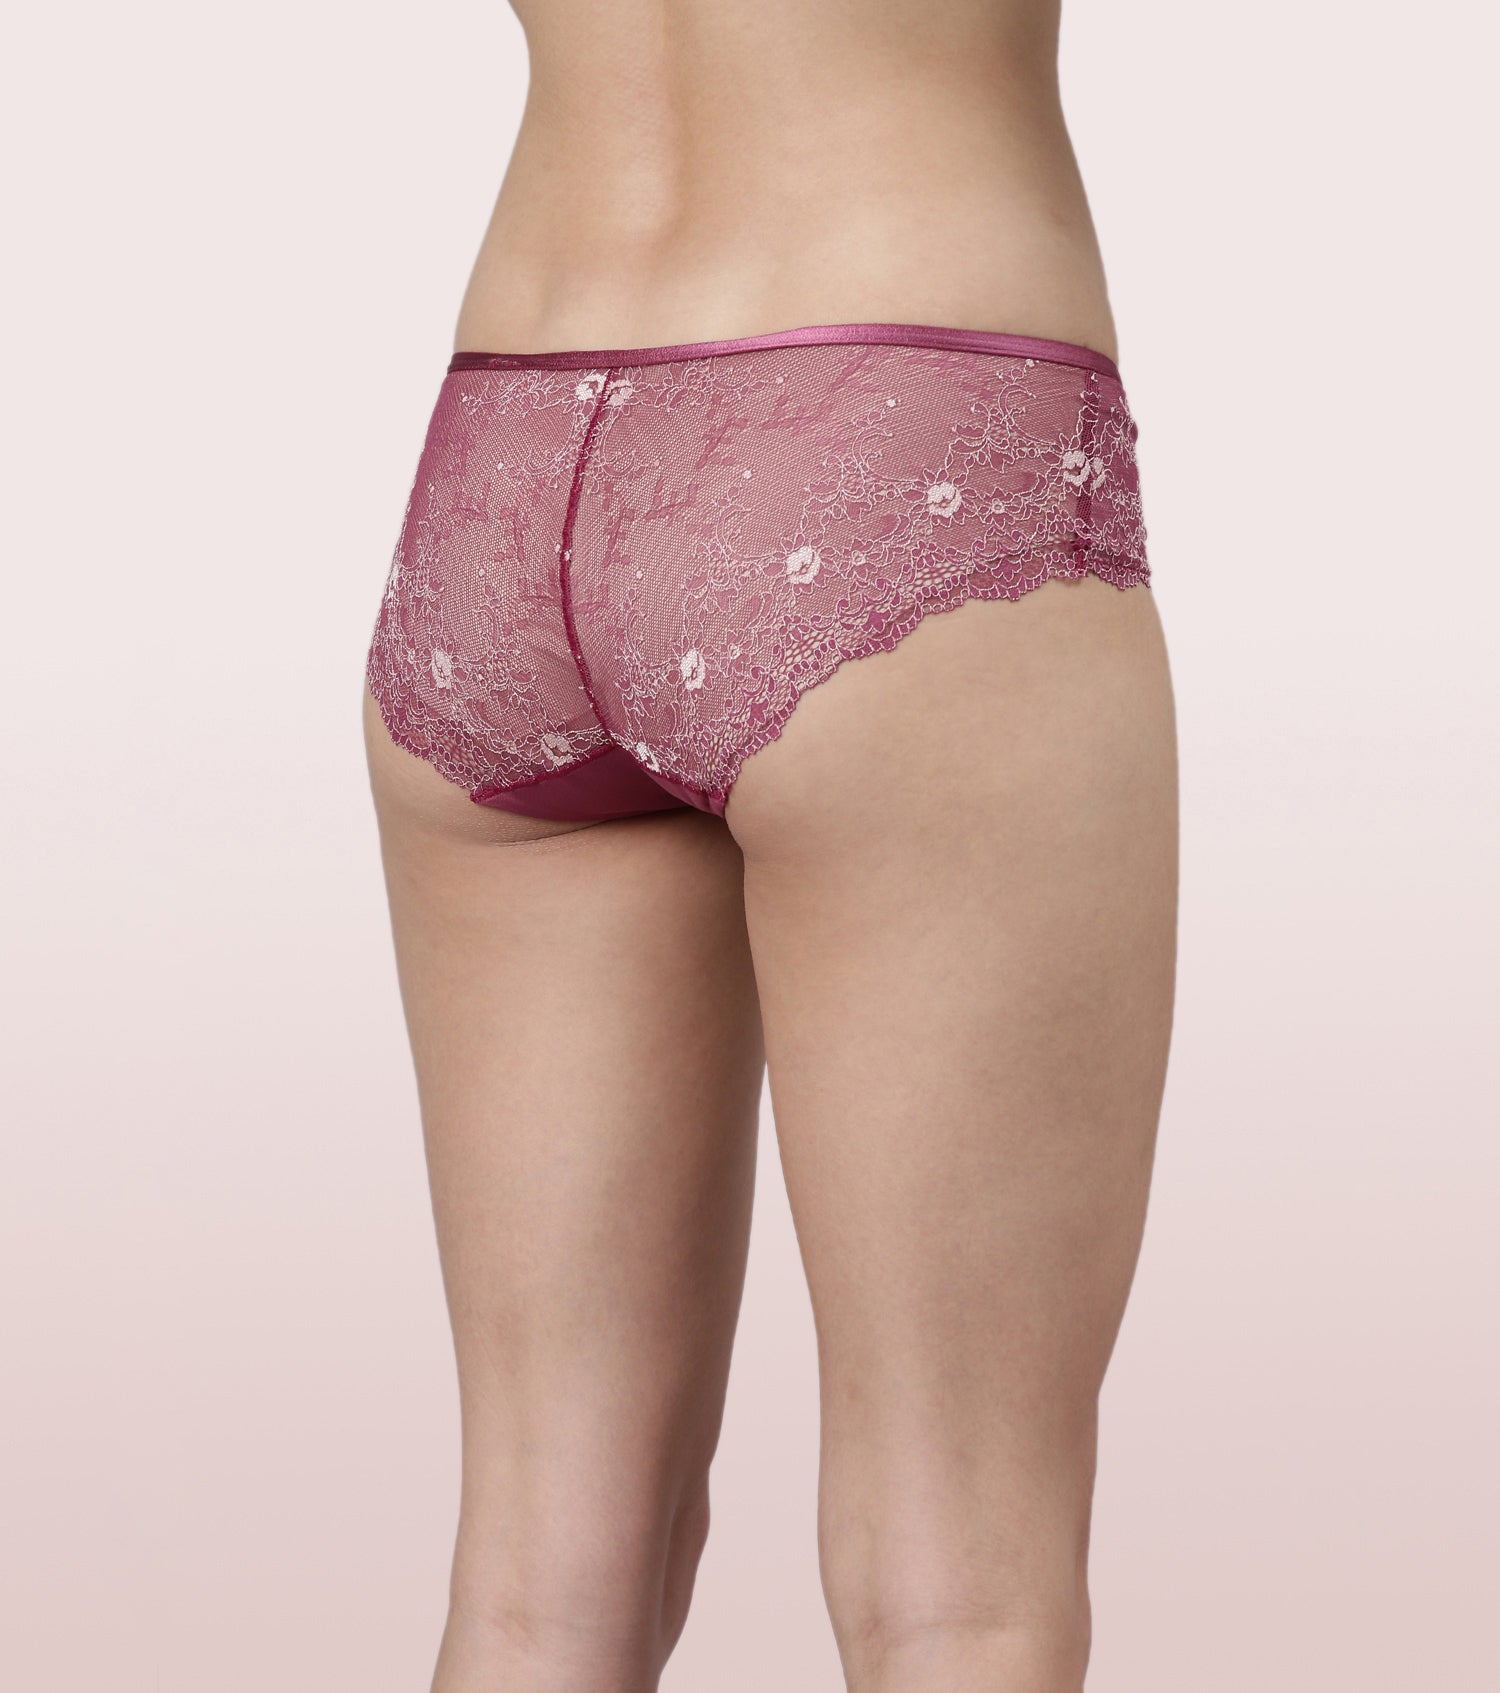 Enamor Lace Hipster Panty with Ultra Low Waist - Cosmic Sky / S